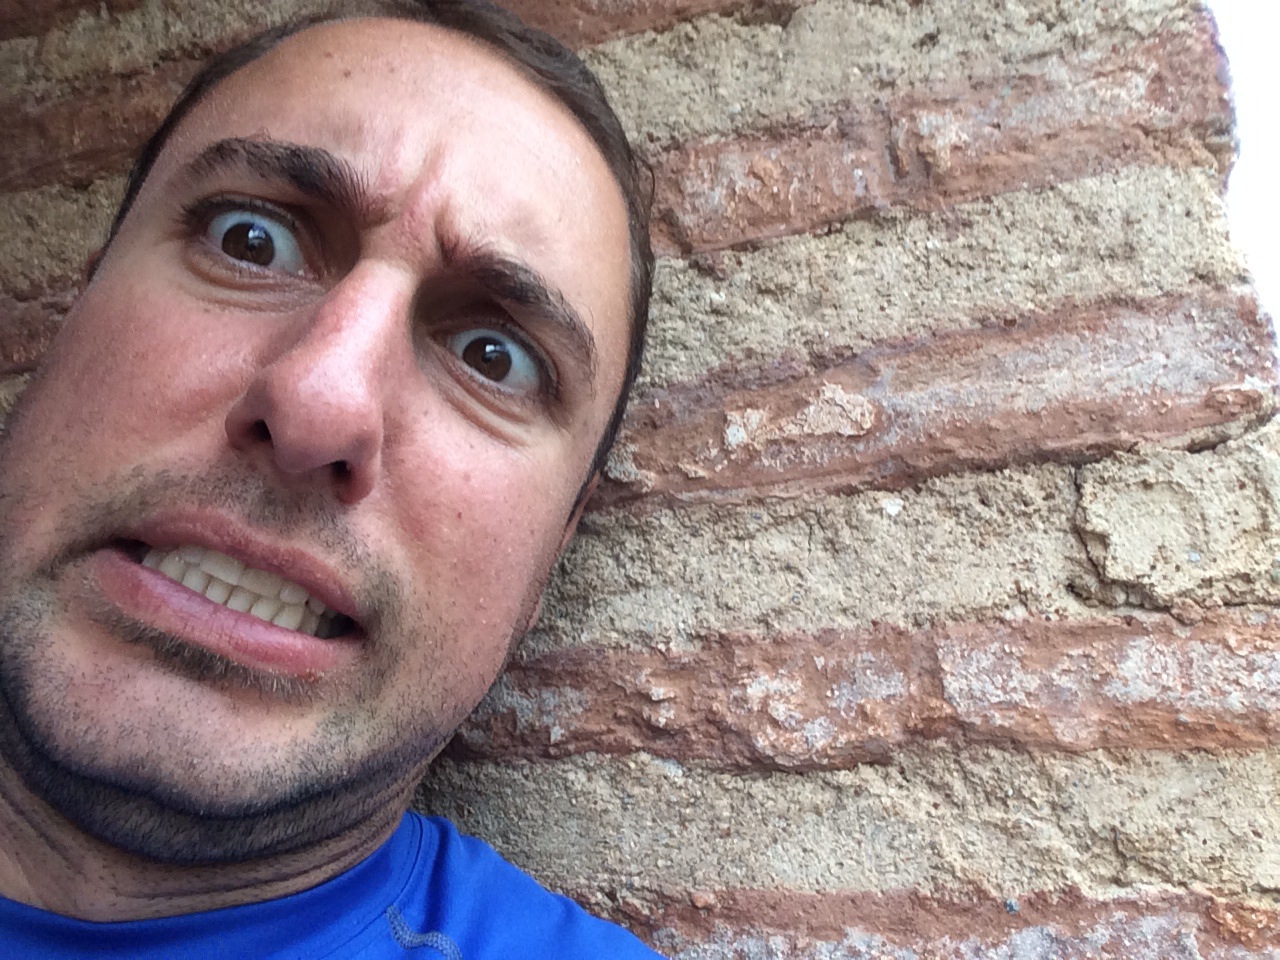 A man in a blue shirt stands in front of a brick wall with a confused/concerned look on his face.